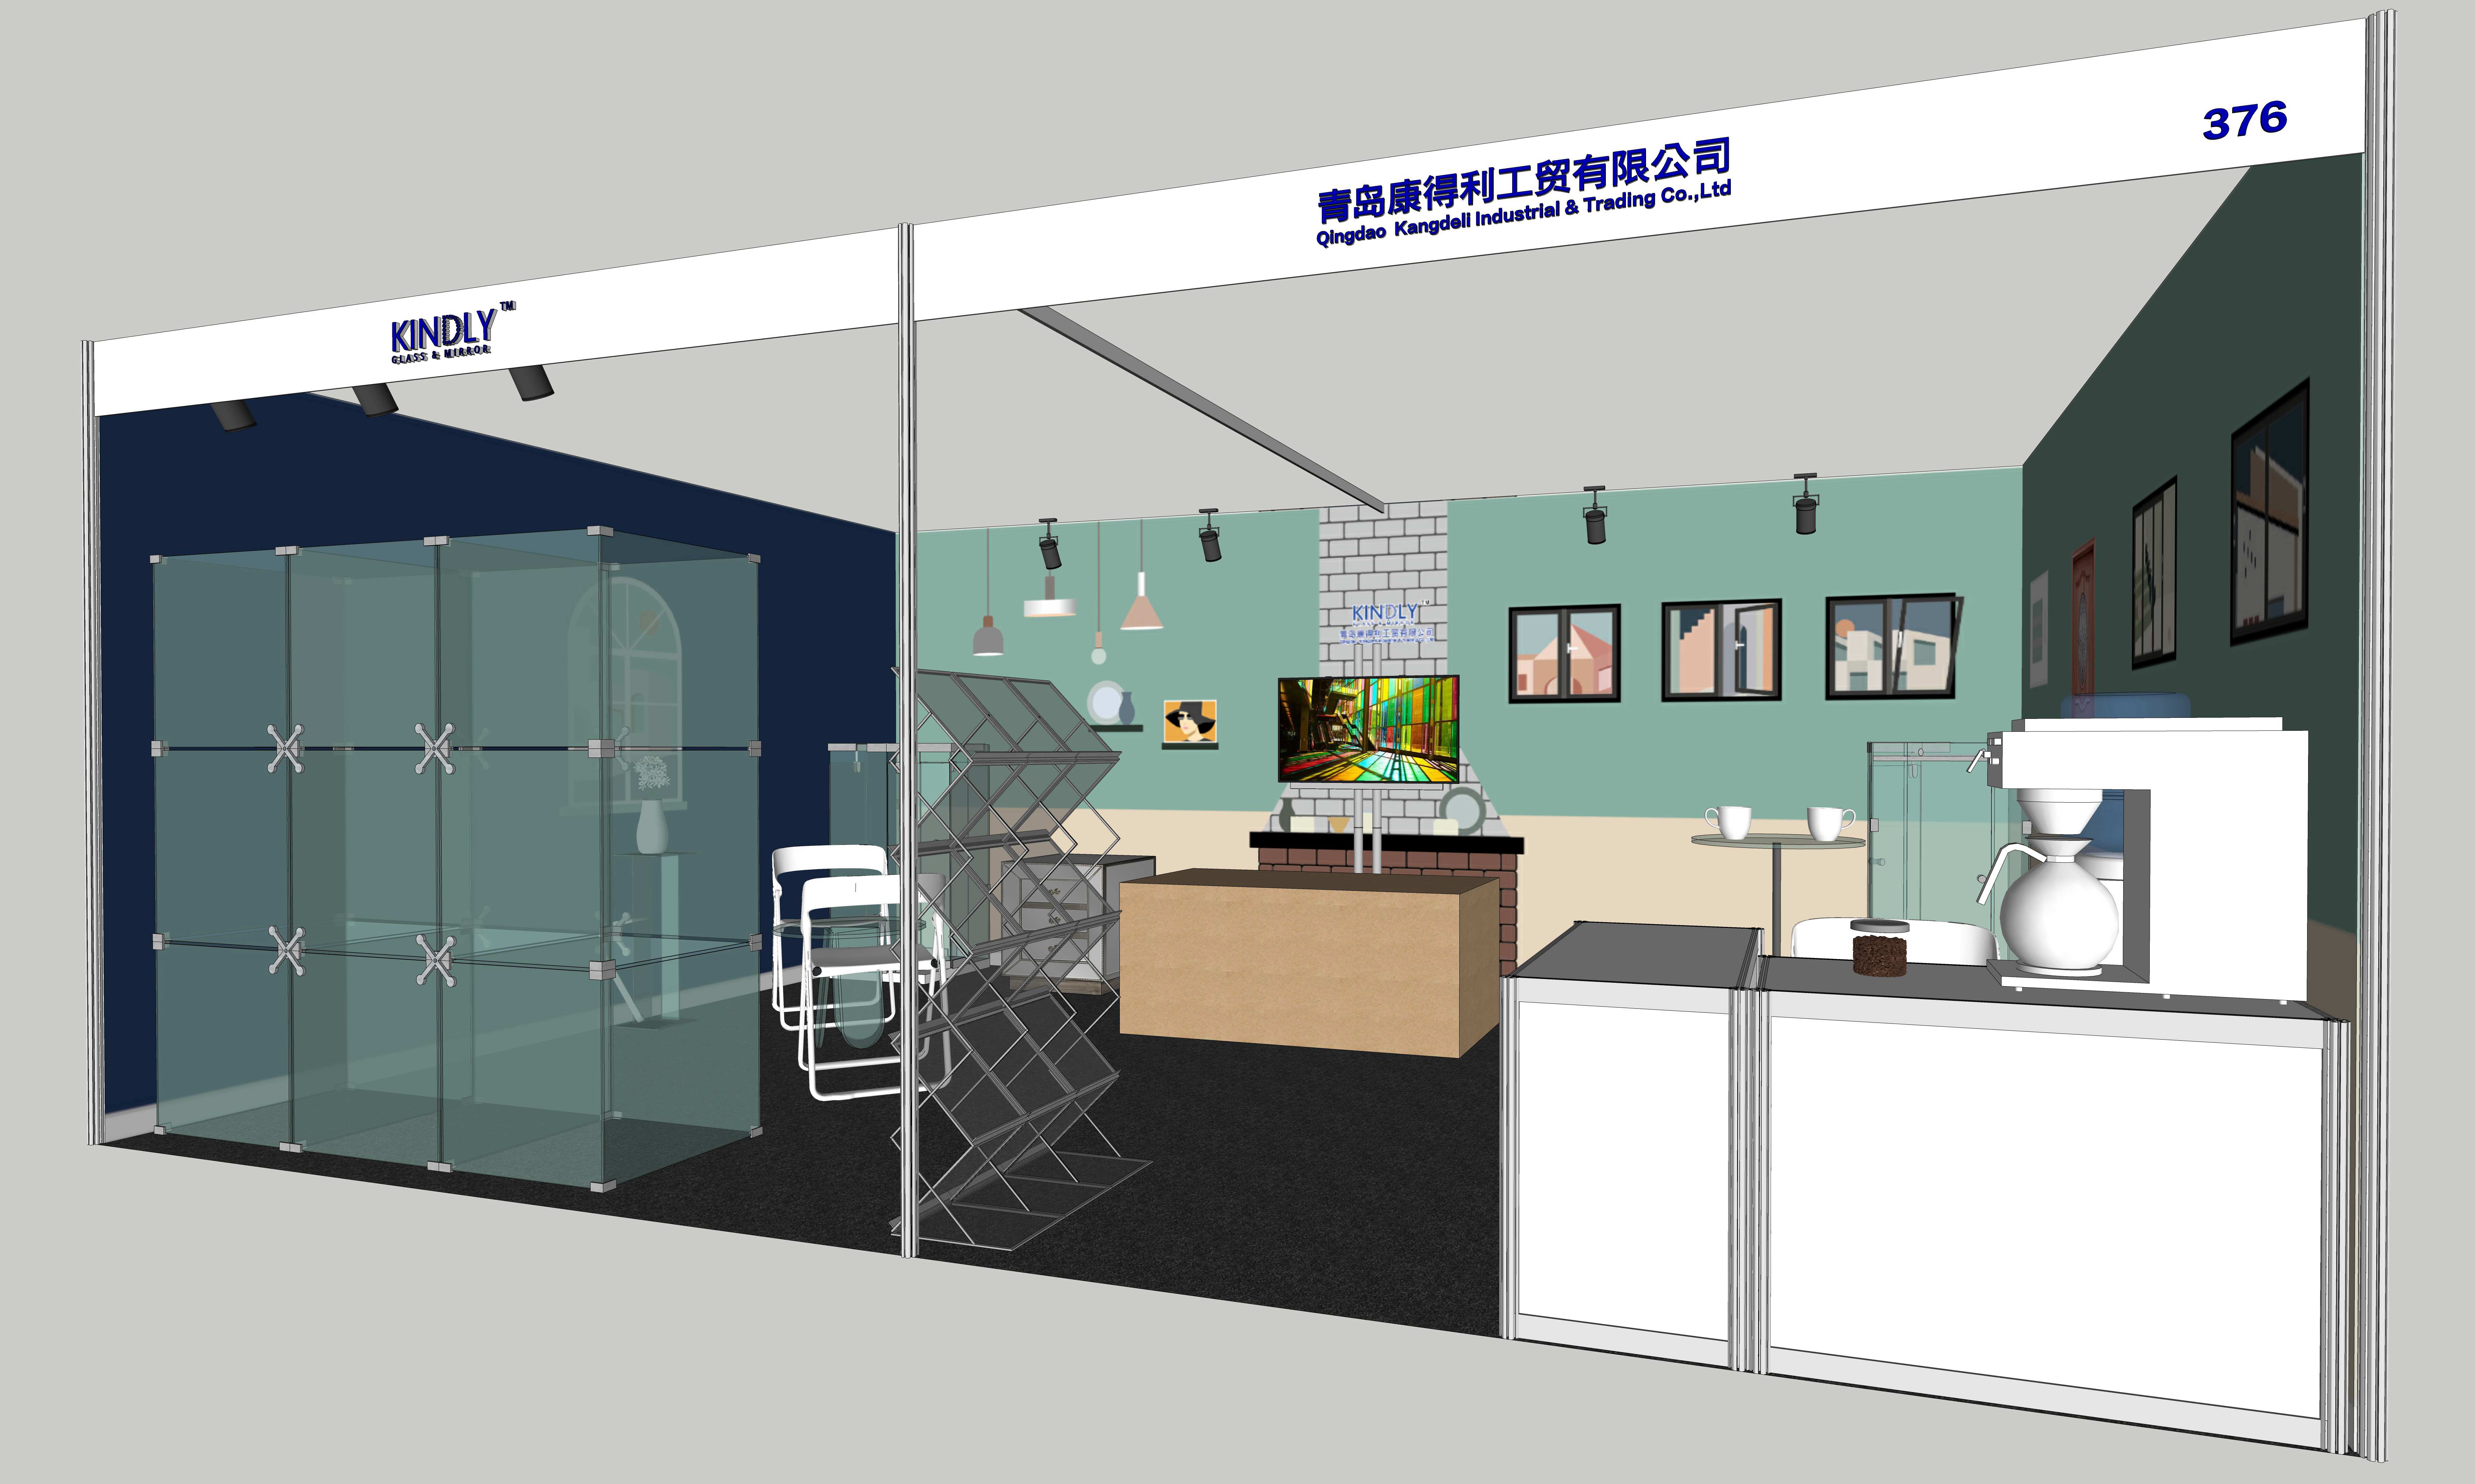 31st China International Glass Industrial Technical Exhibition. Kindlyglass Berth No.:N1-376 2021.05.06-.05.09